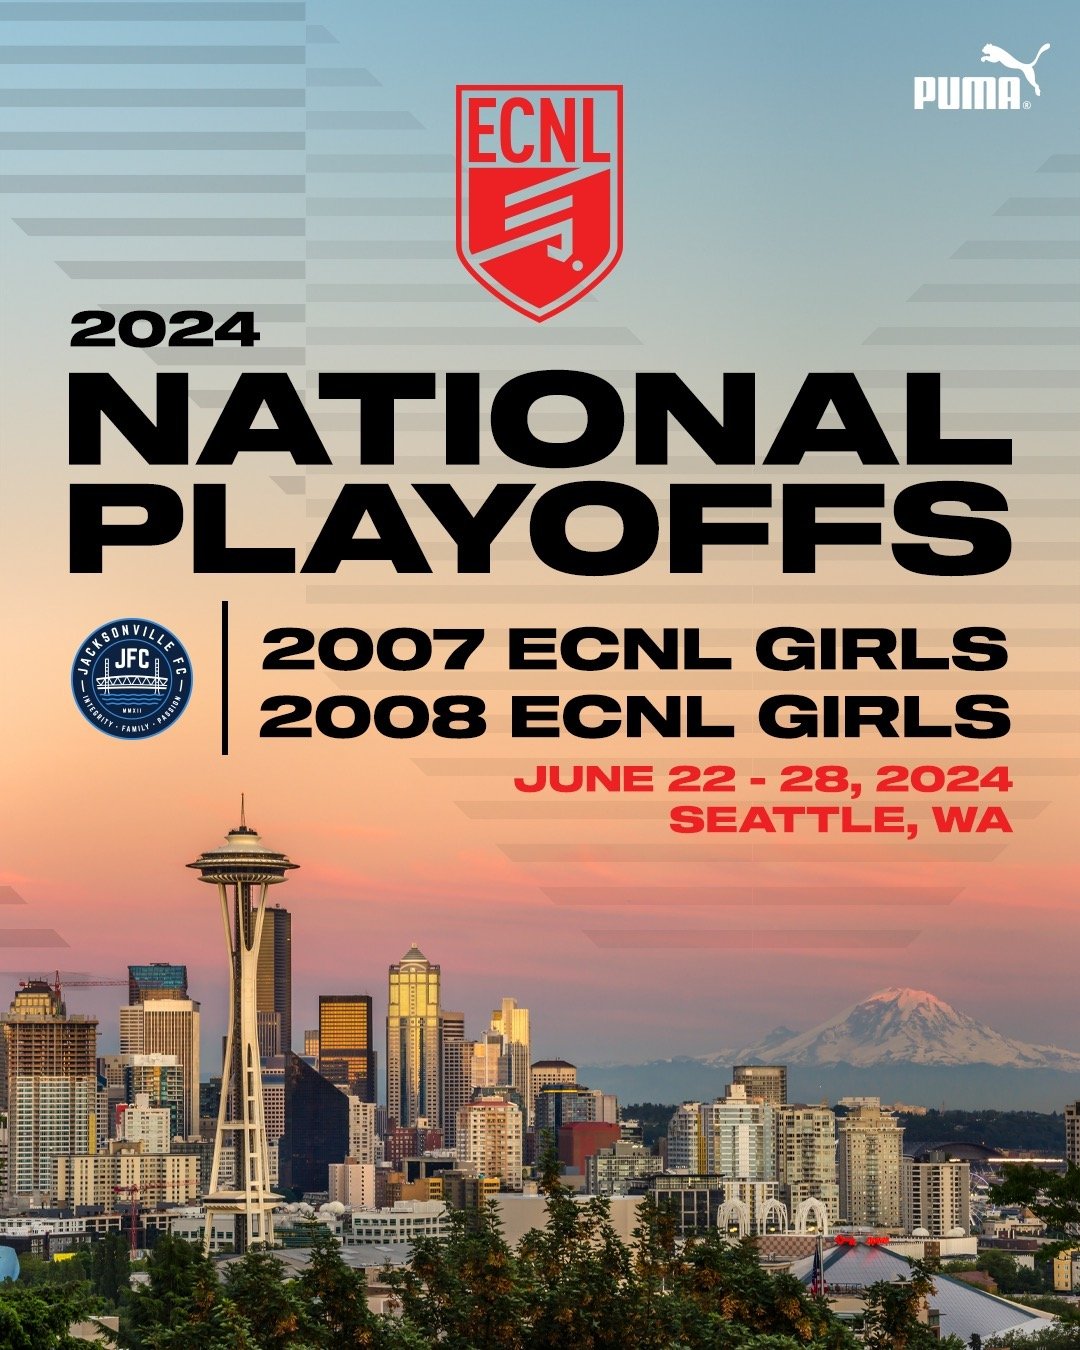 It's official: Our JFC 2007 and 2008 ECNL Girls teams have clinched their spots in the 2024 ECNL National Championship in Seattle this June!

But here's the deal: We're not satisfied with just punching a ticket. No way! That's not how champions are m